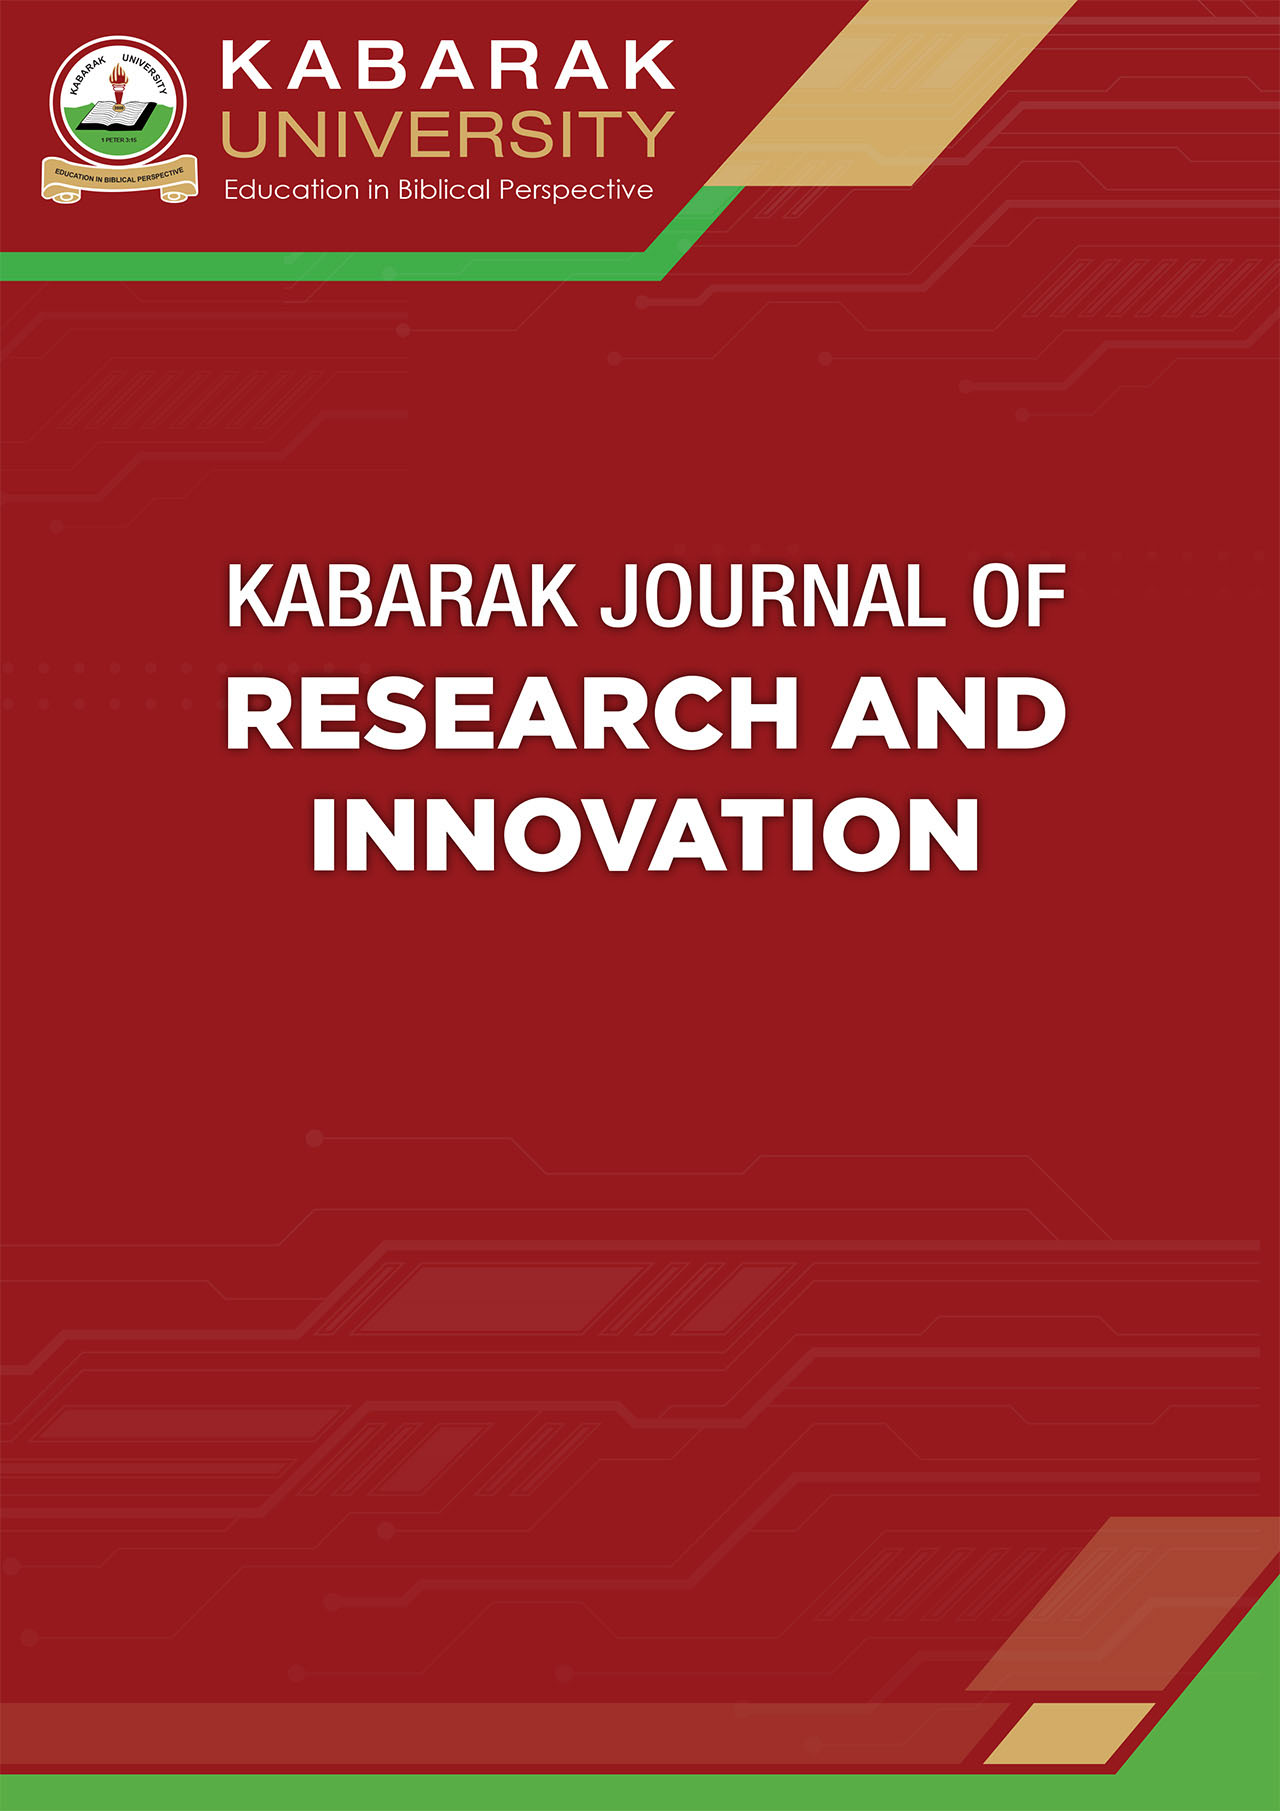 					View Vol. 3 No. 2 (2015): Kabarak Journal of Research and Innovation (KJRI) 
				